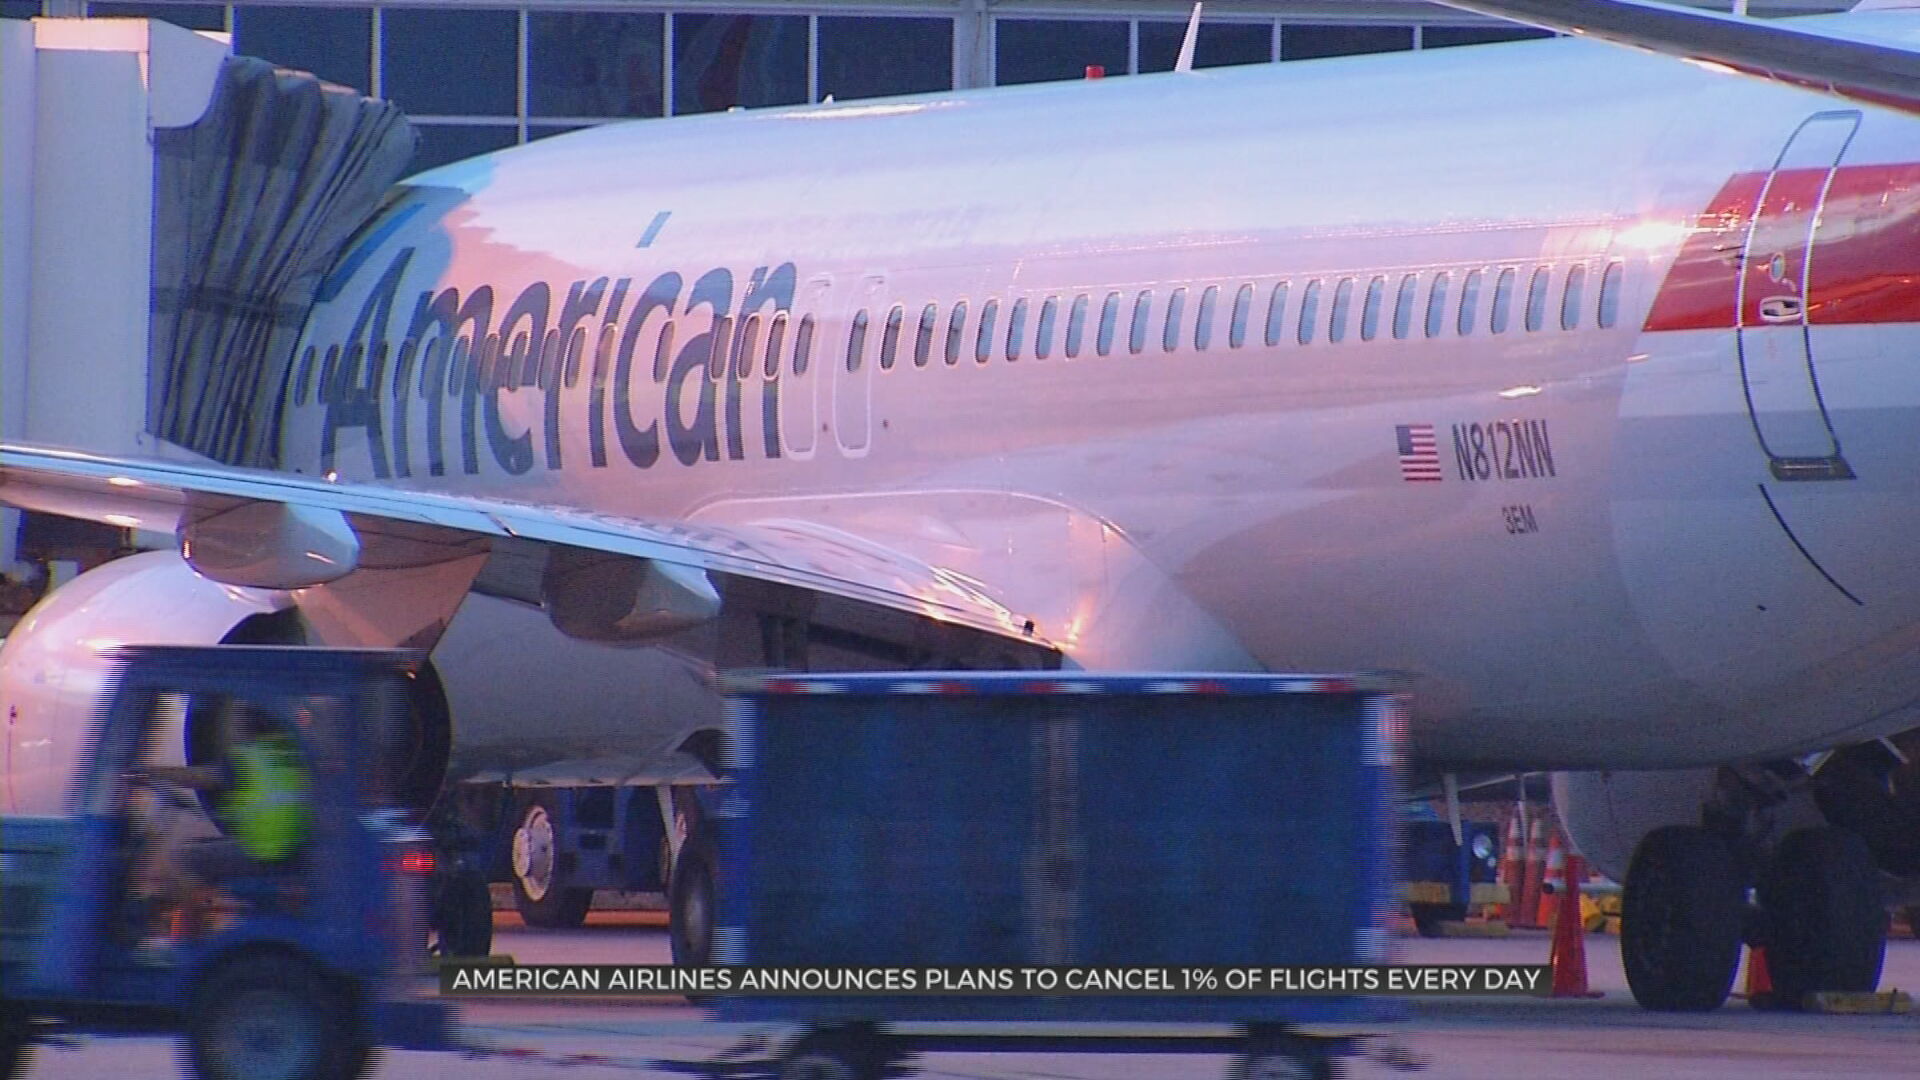 American Airlines Announces Plans To Cancel 1% Of Flights Per Day